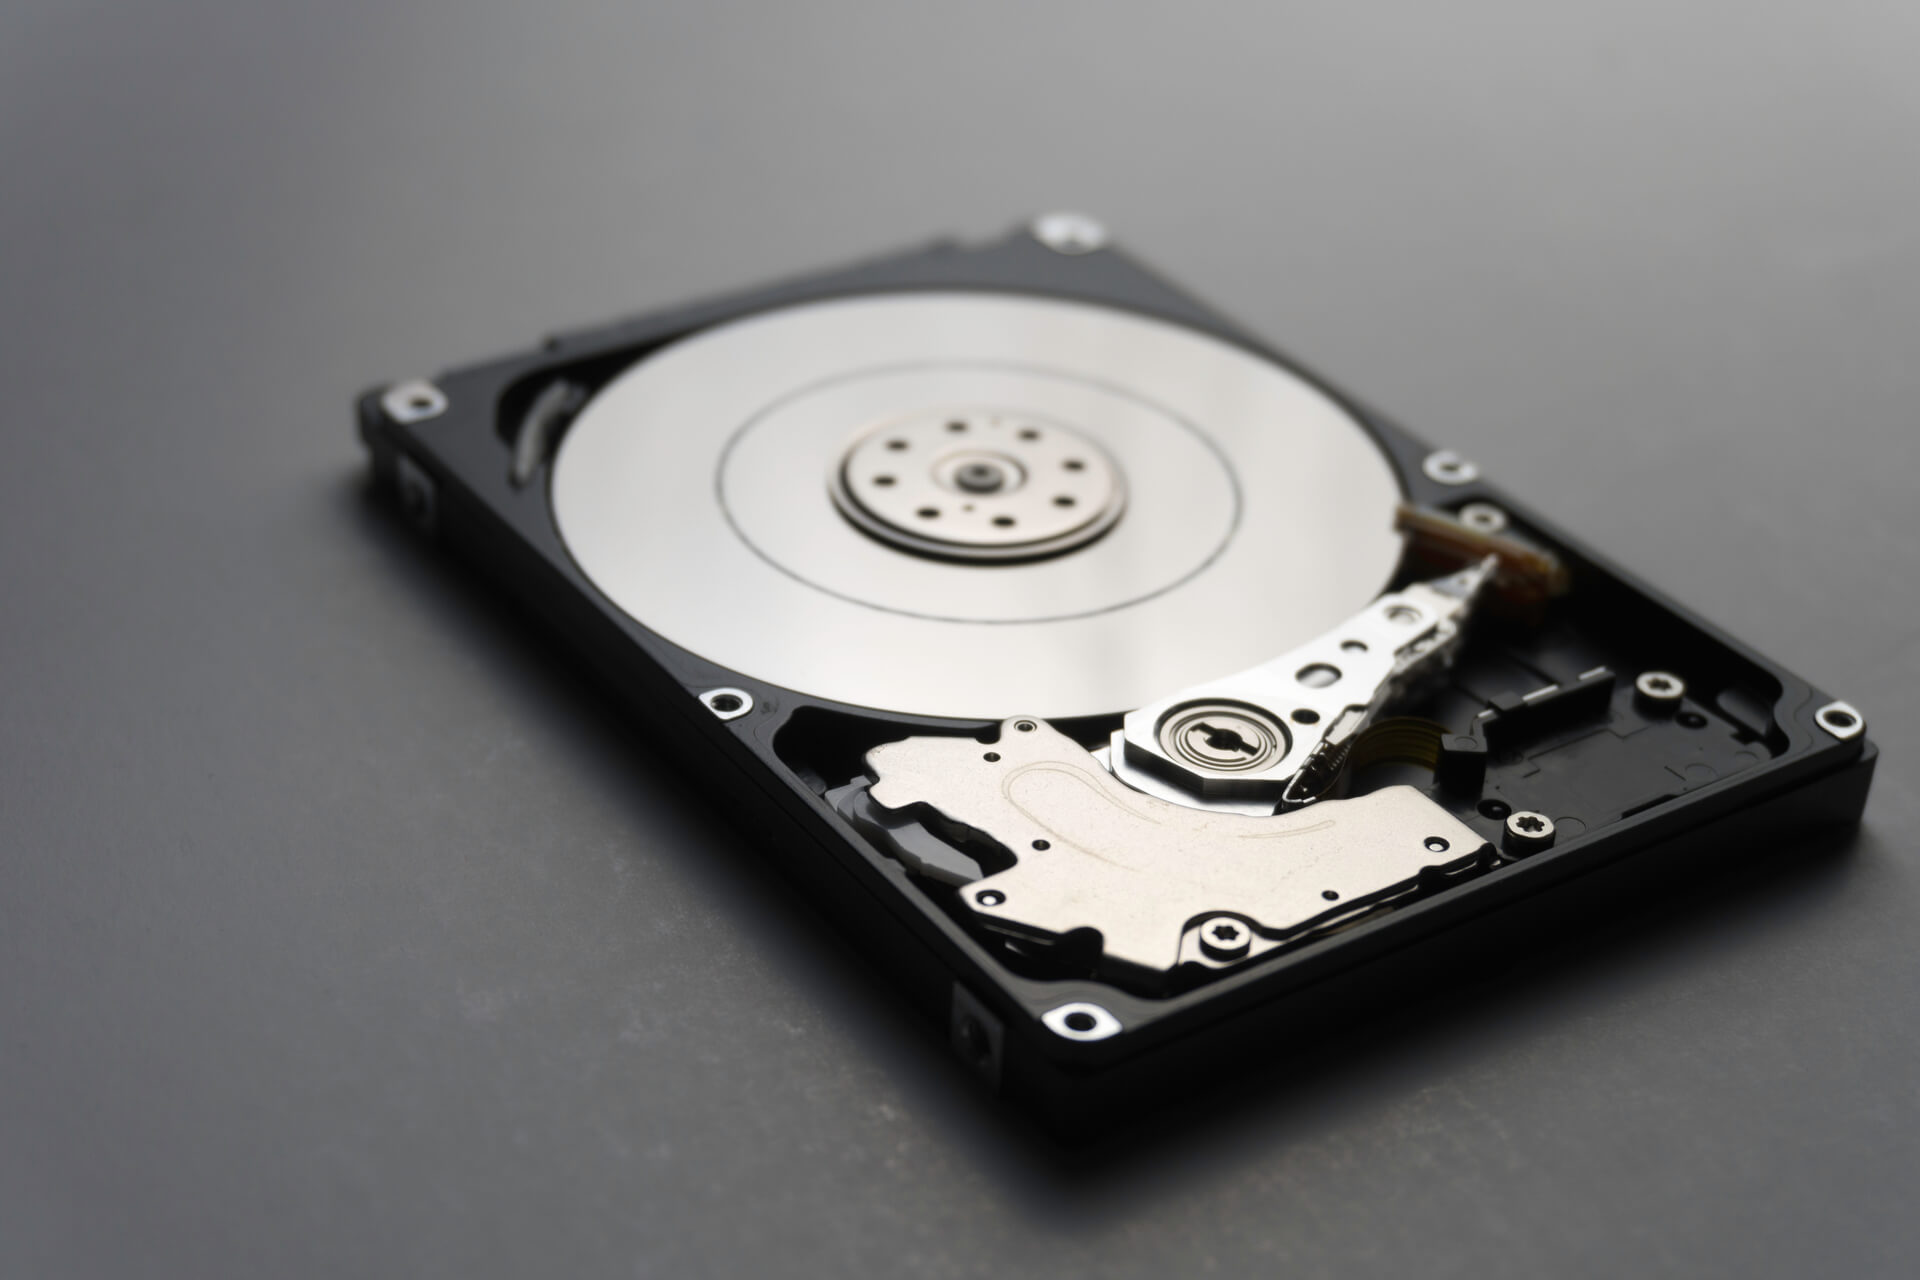 Hard Drive Destruction By Commerical Asset Disposition Company in Dallas